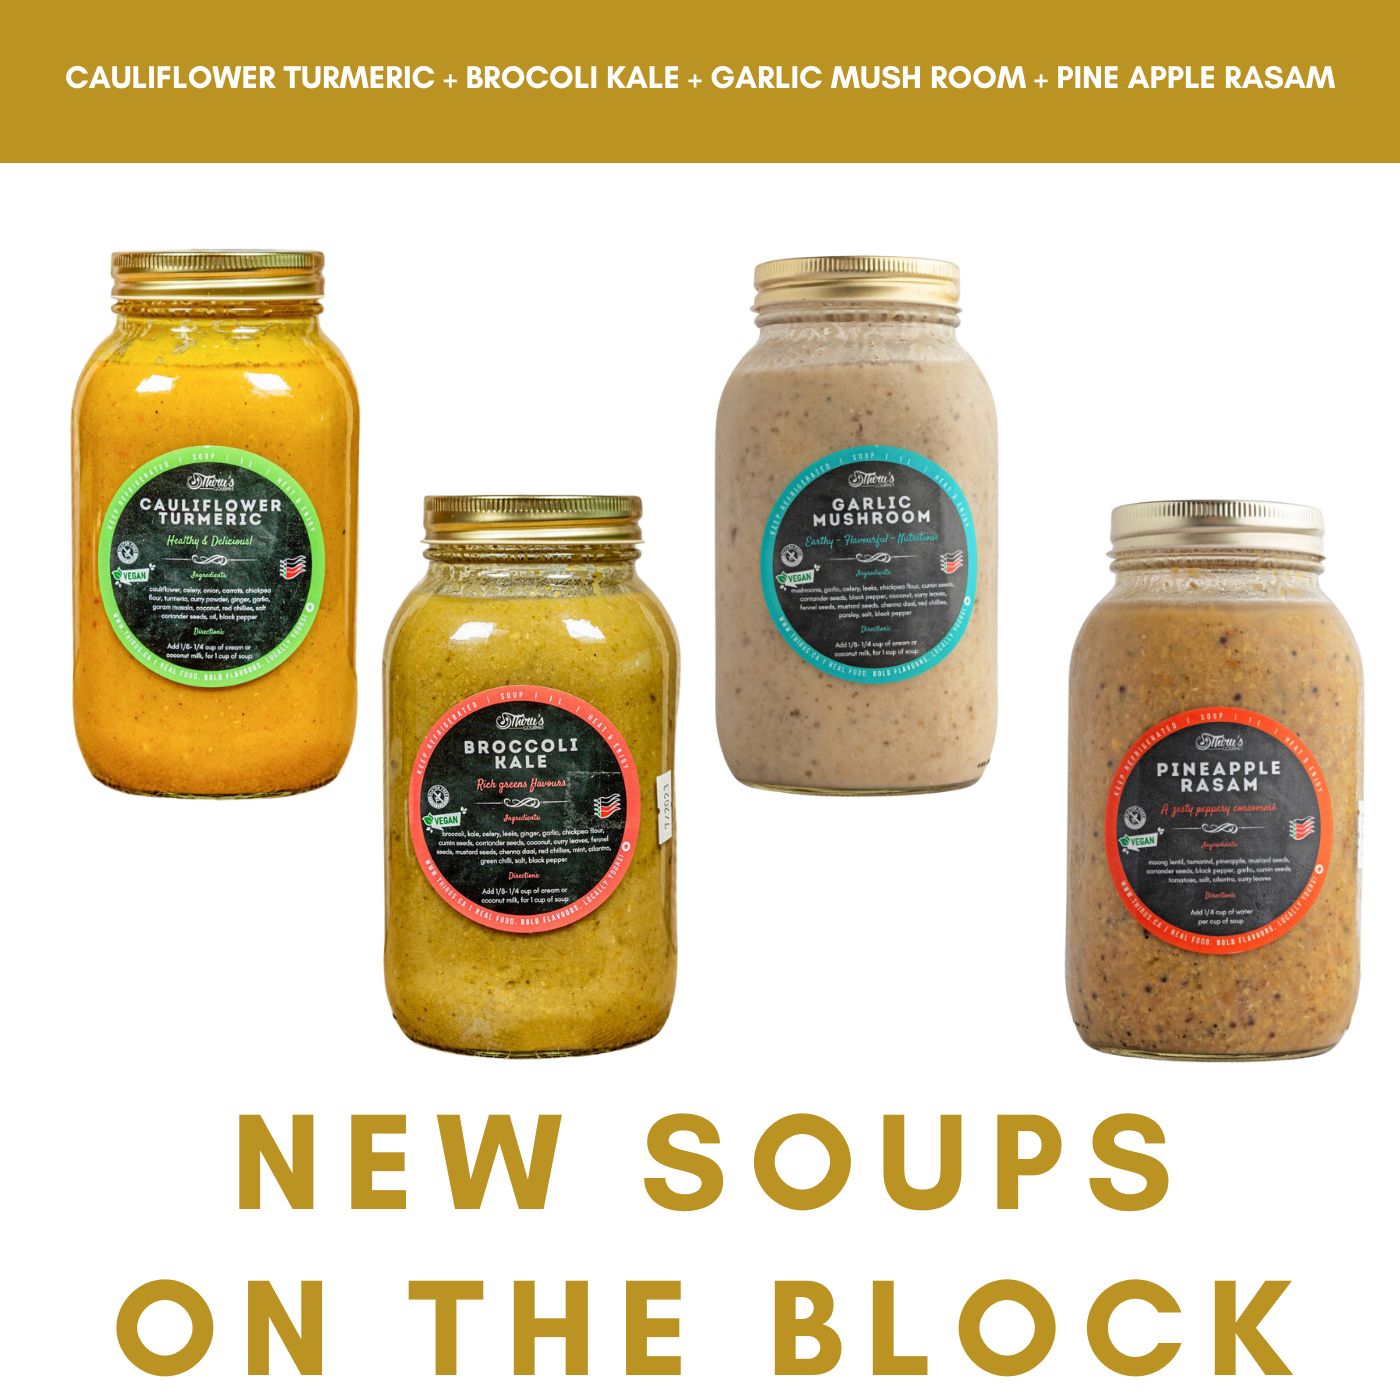 New Soups on the Block